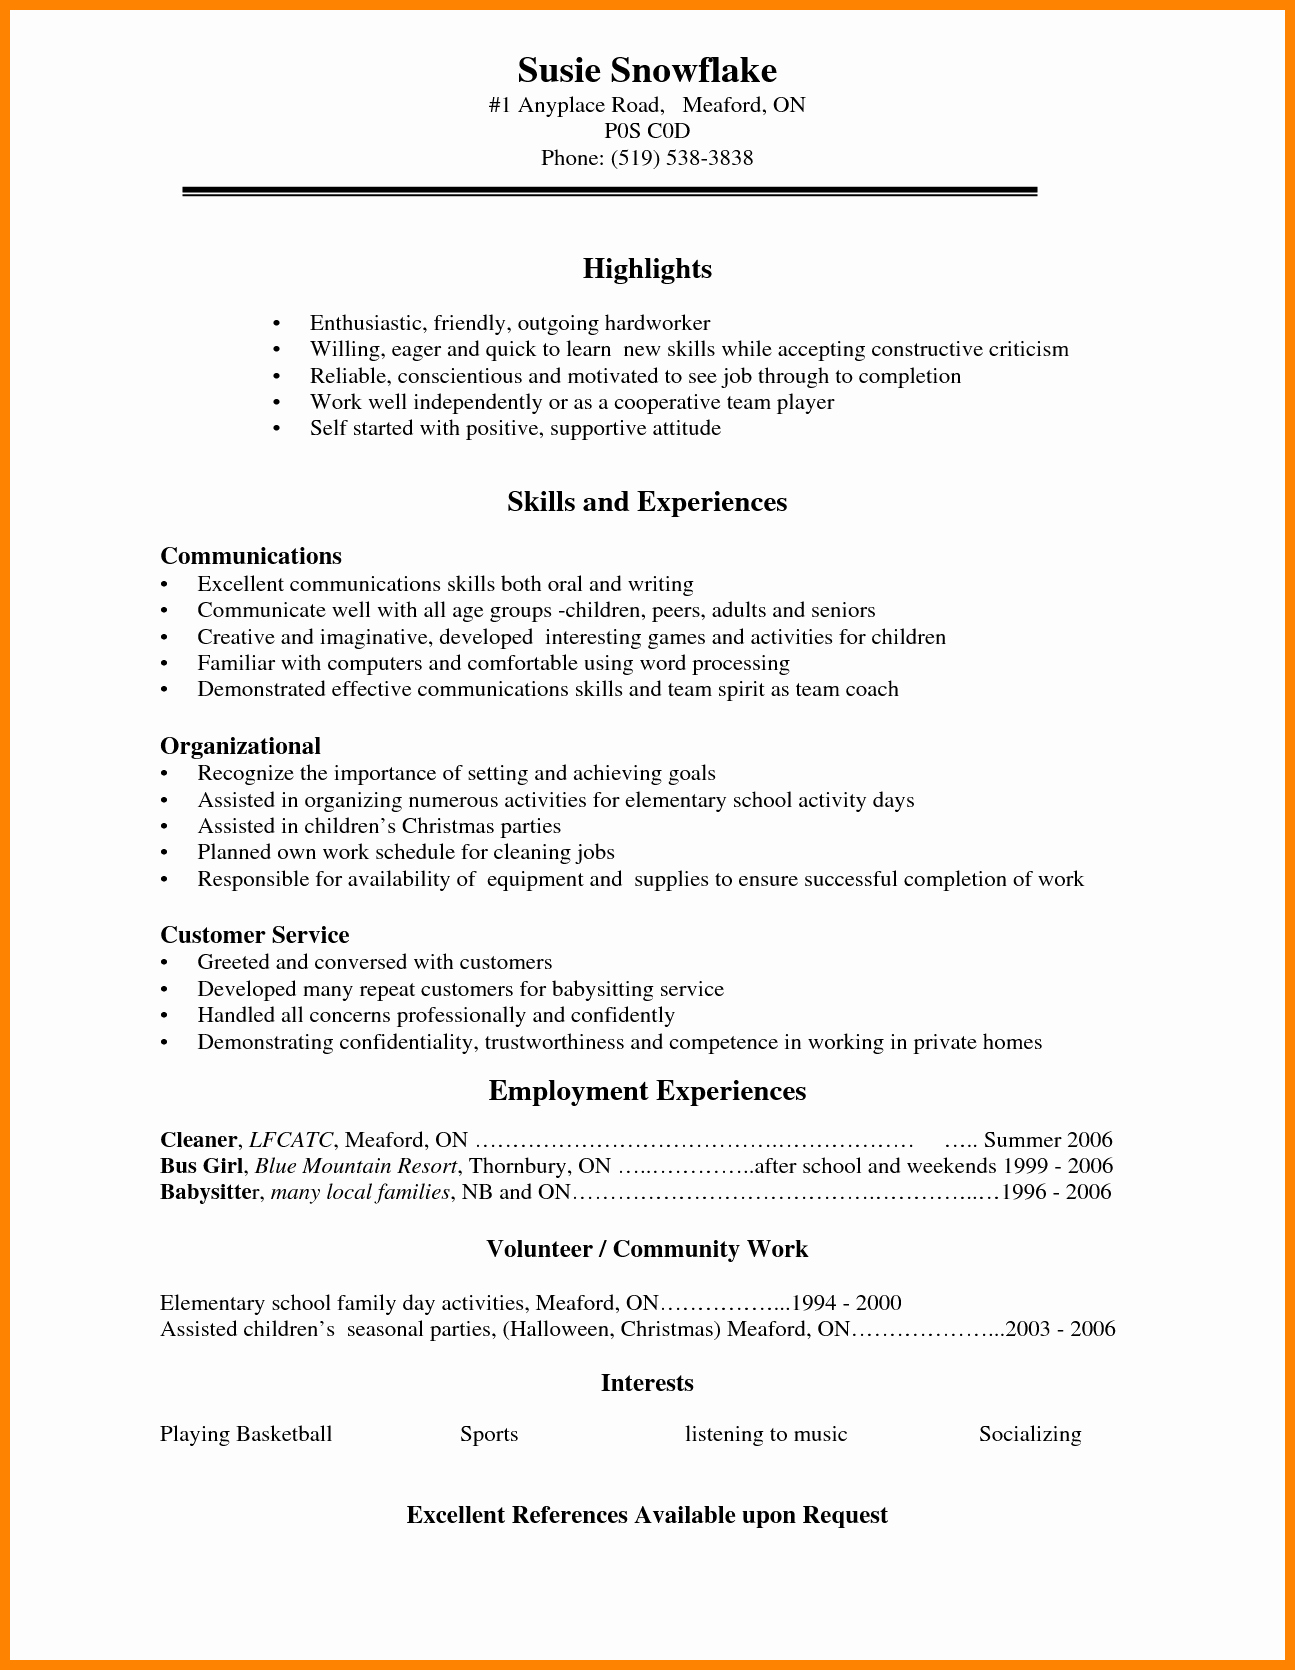 Resume after High School Awesome 5 Cv Template for High School Student